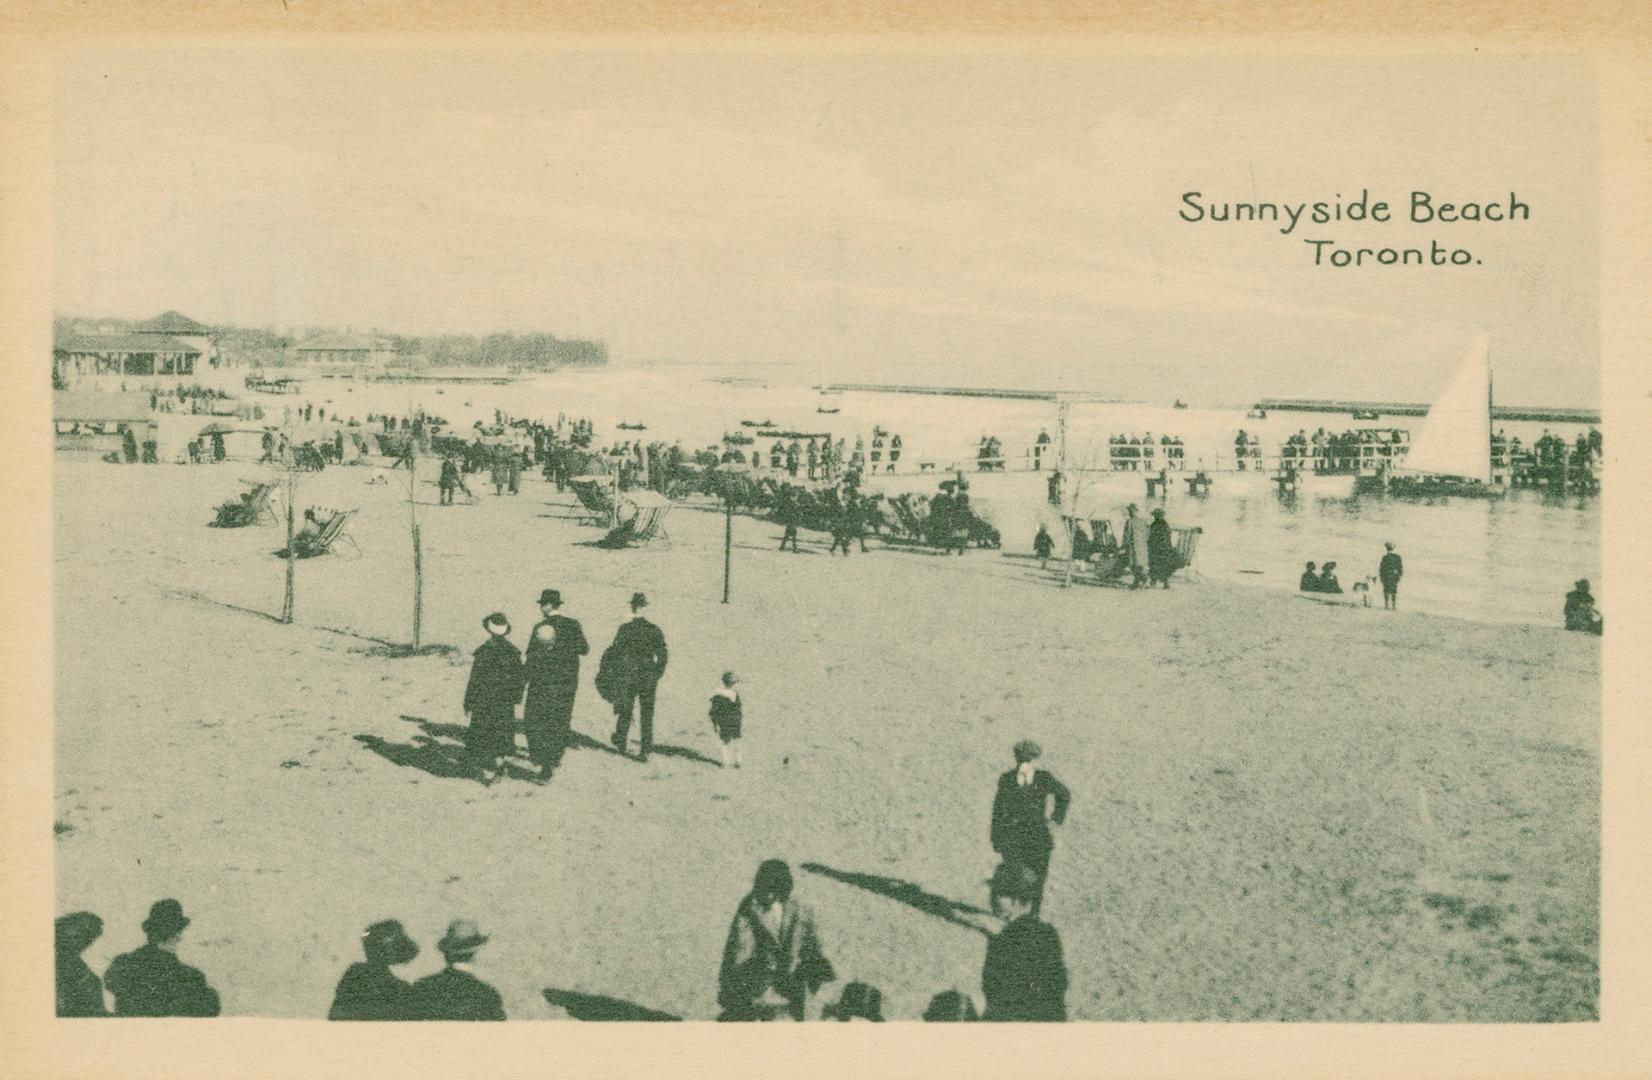 Picture of people wearing coats and hats walking on a beach and some seated near the shore in c ...